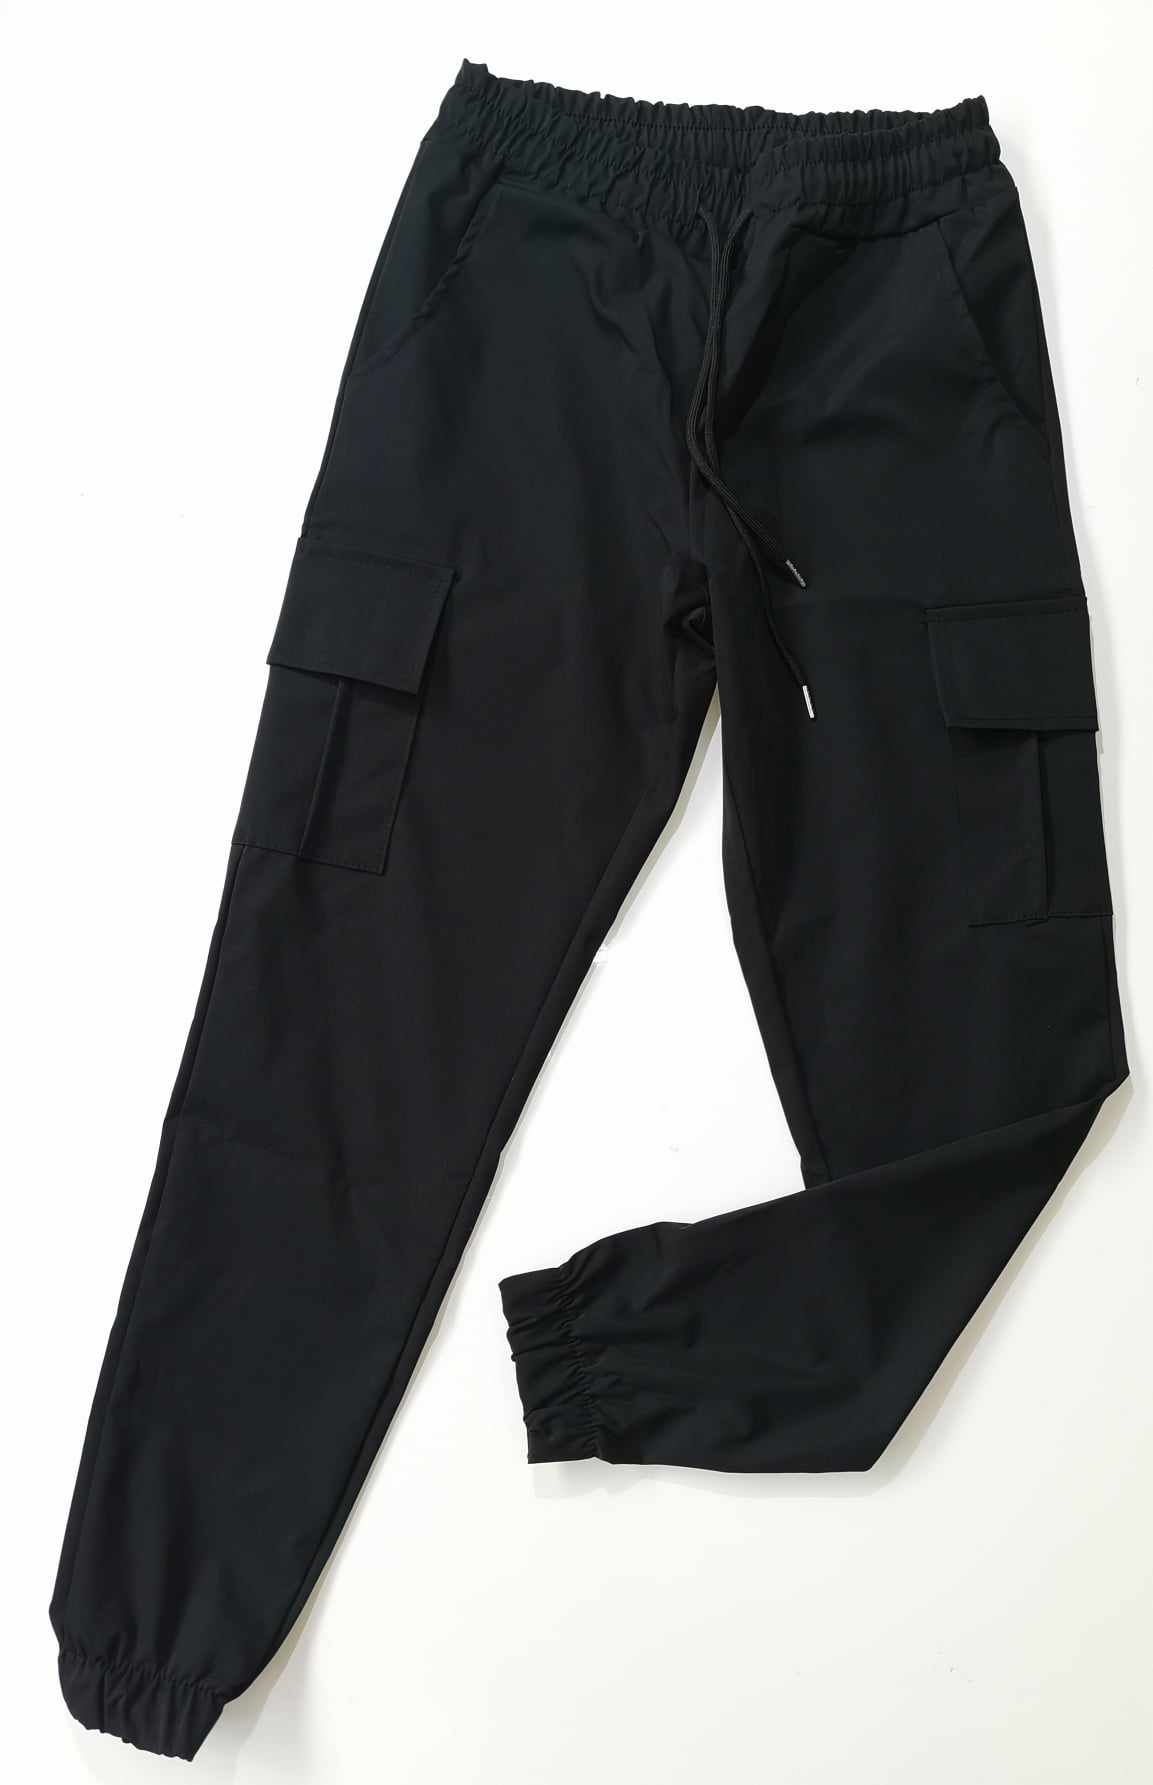 TROUSER NOBLE 24/24 MONOC. WITH ELASTIC WAIST AND POCKETS ΜΑΝ